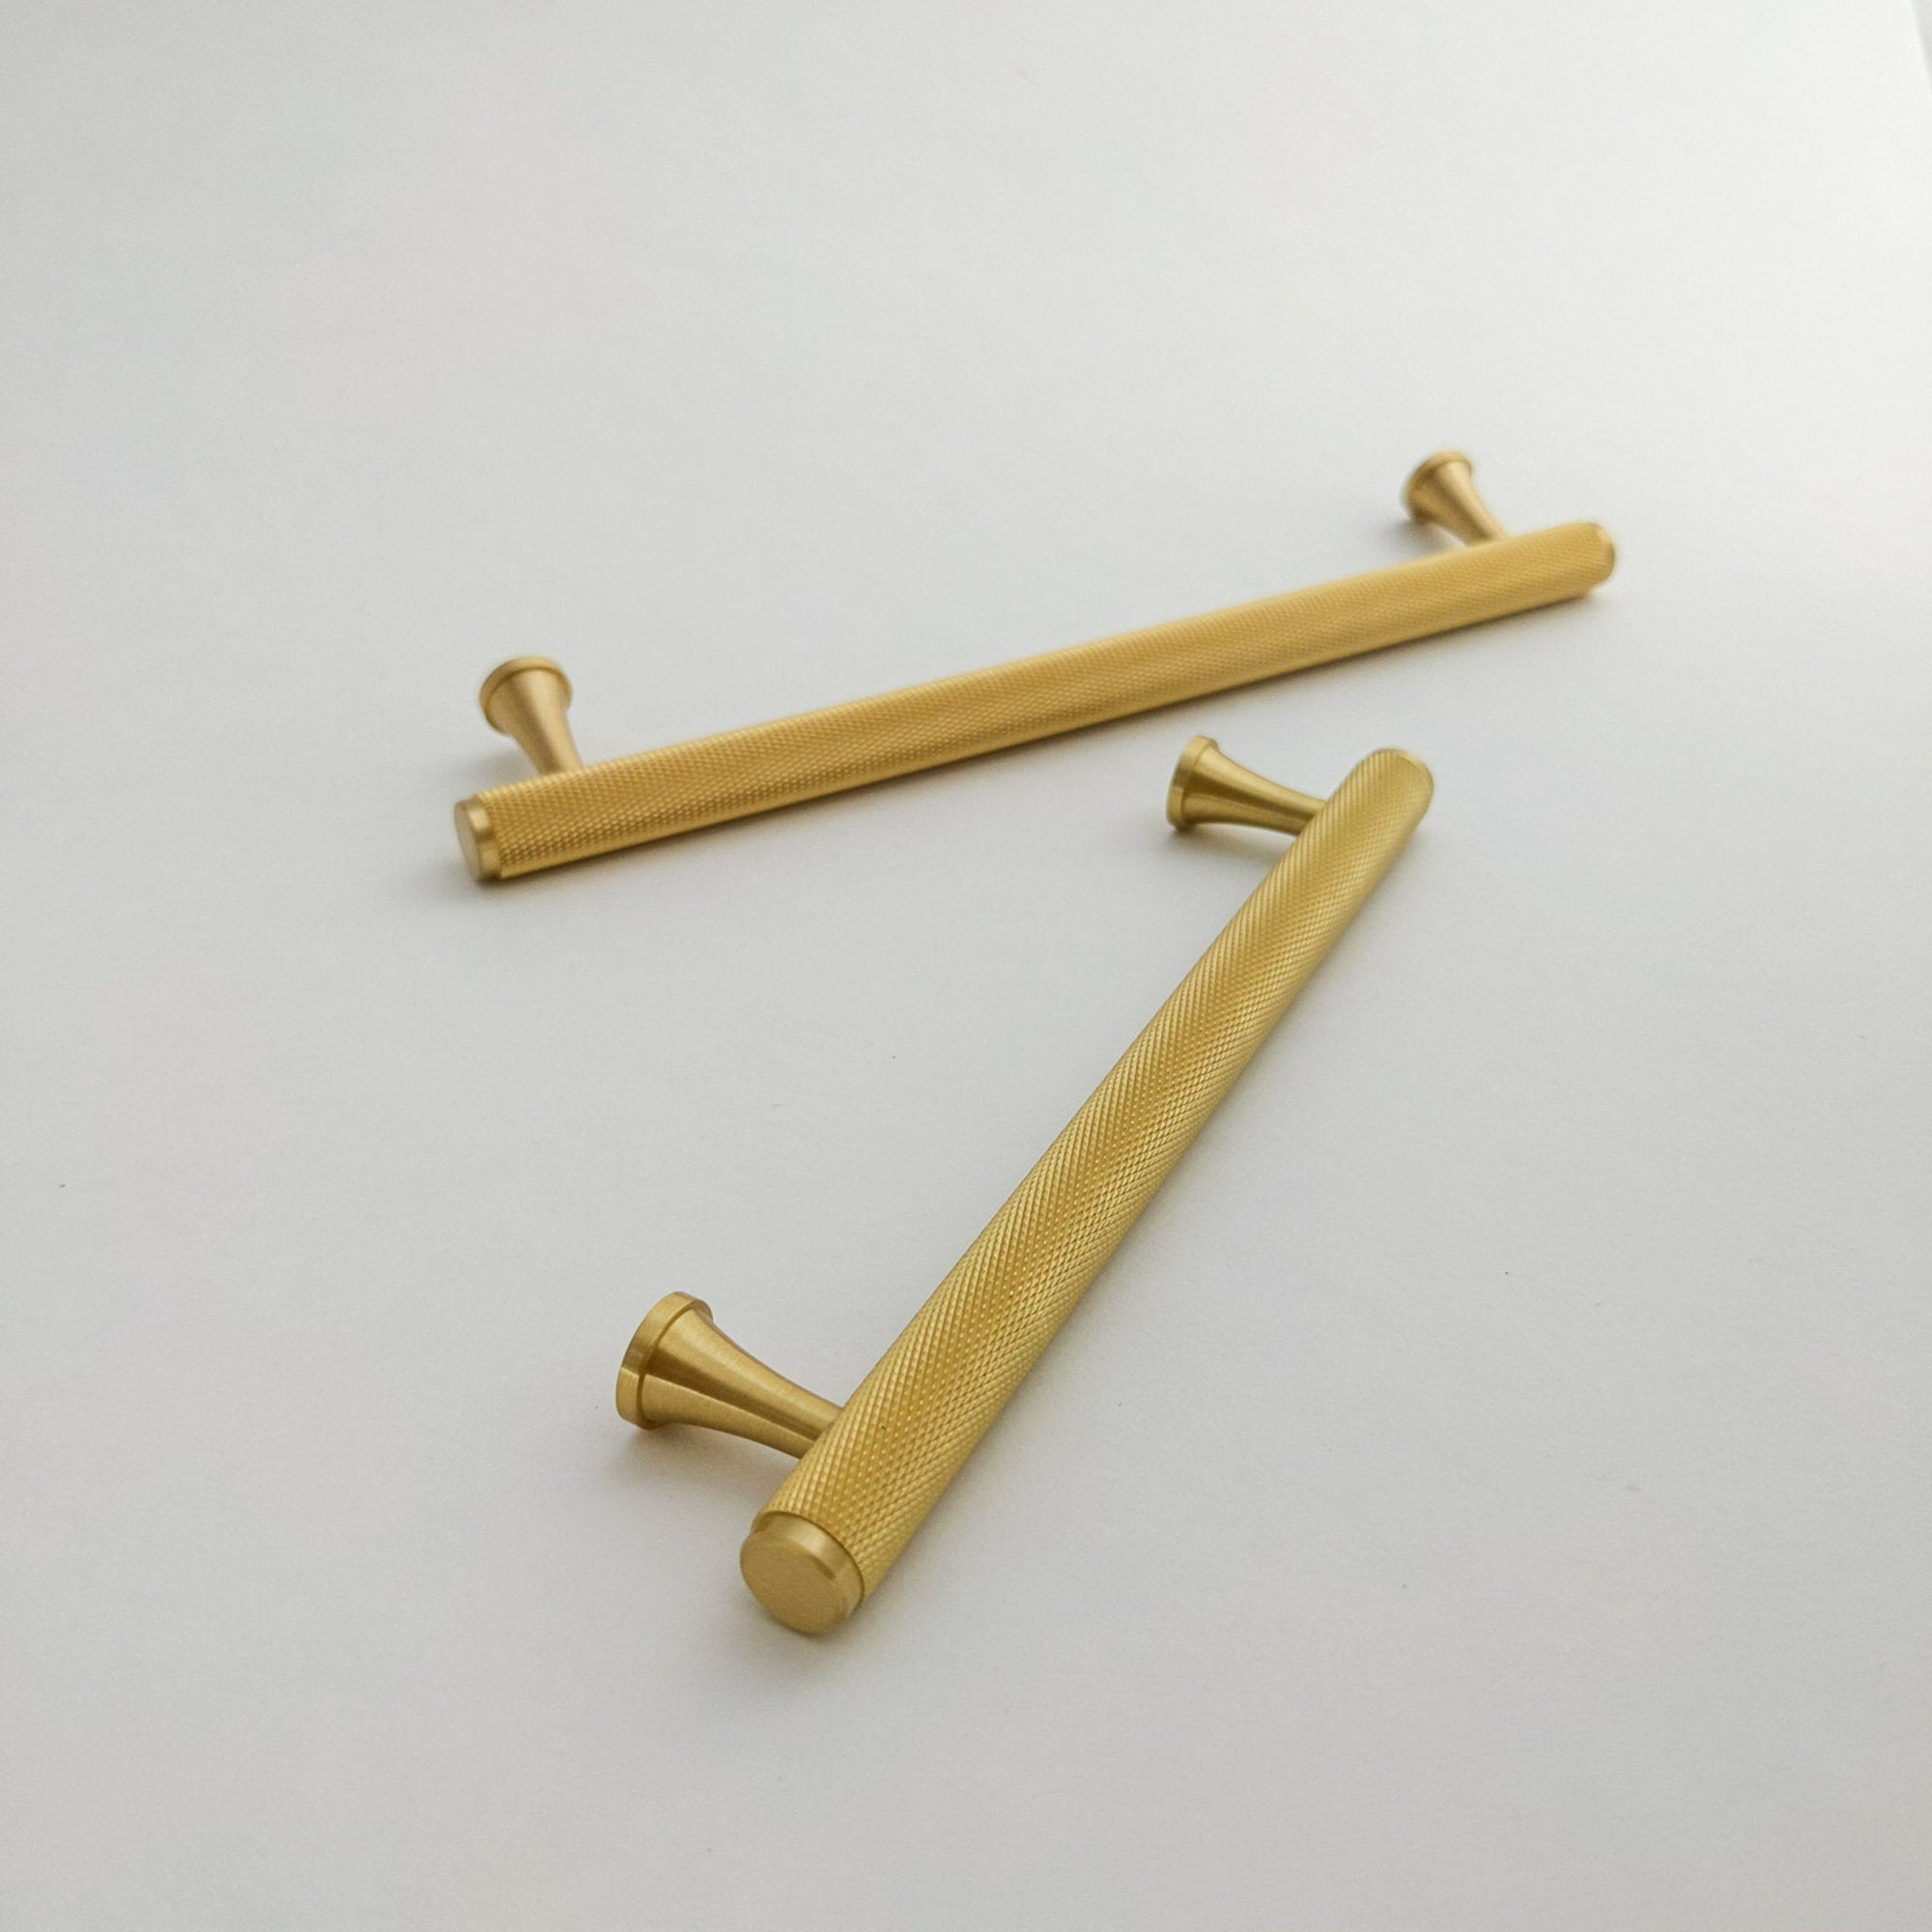 Knurled Brass Handles and T-bar - Drawer Handles pulls, Gold Finish, Cabinet  Pulls, Solid Brass Metal,  Modern